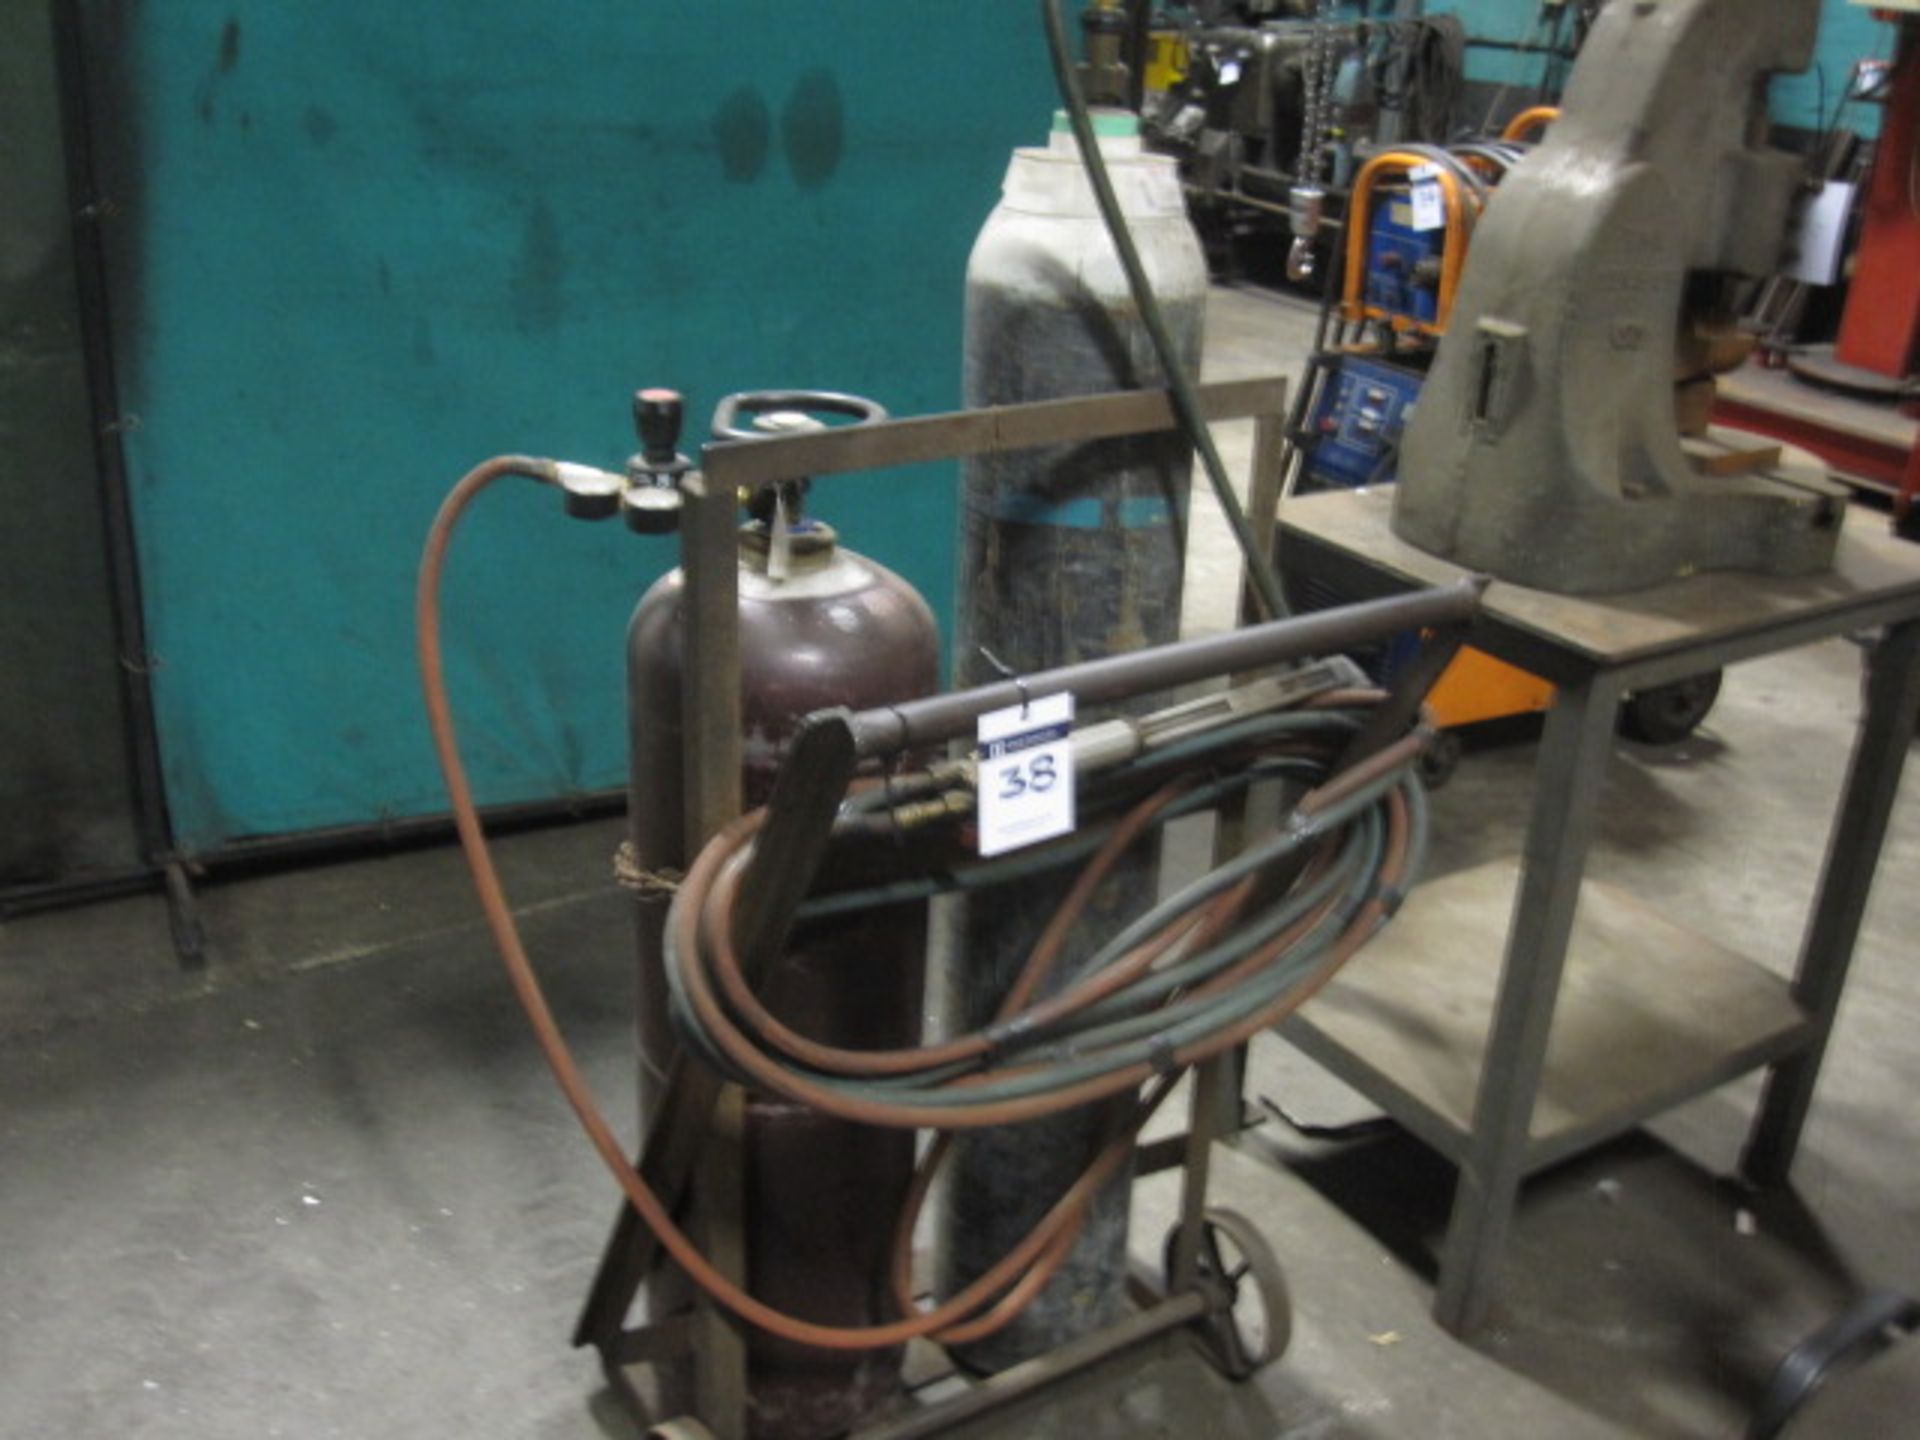 Oxy/acetylene gas cutting torch with tubing and regulators complete with bottle trolley.  Note: